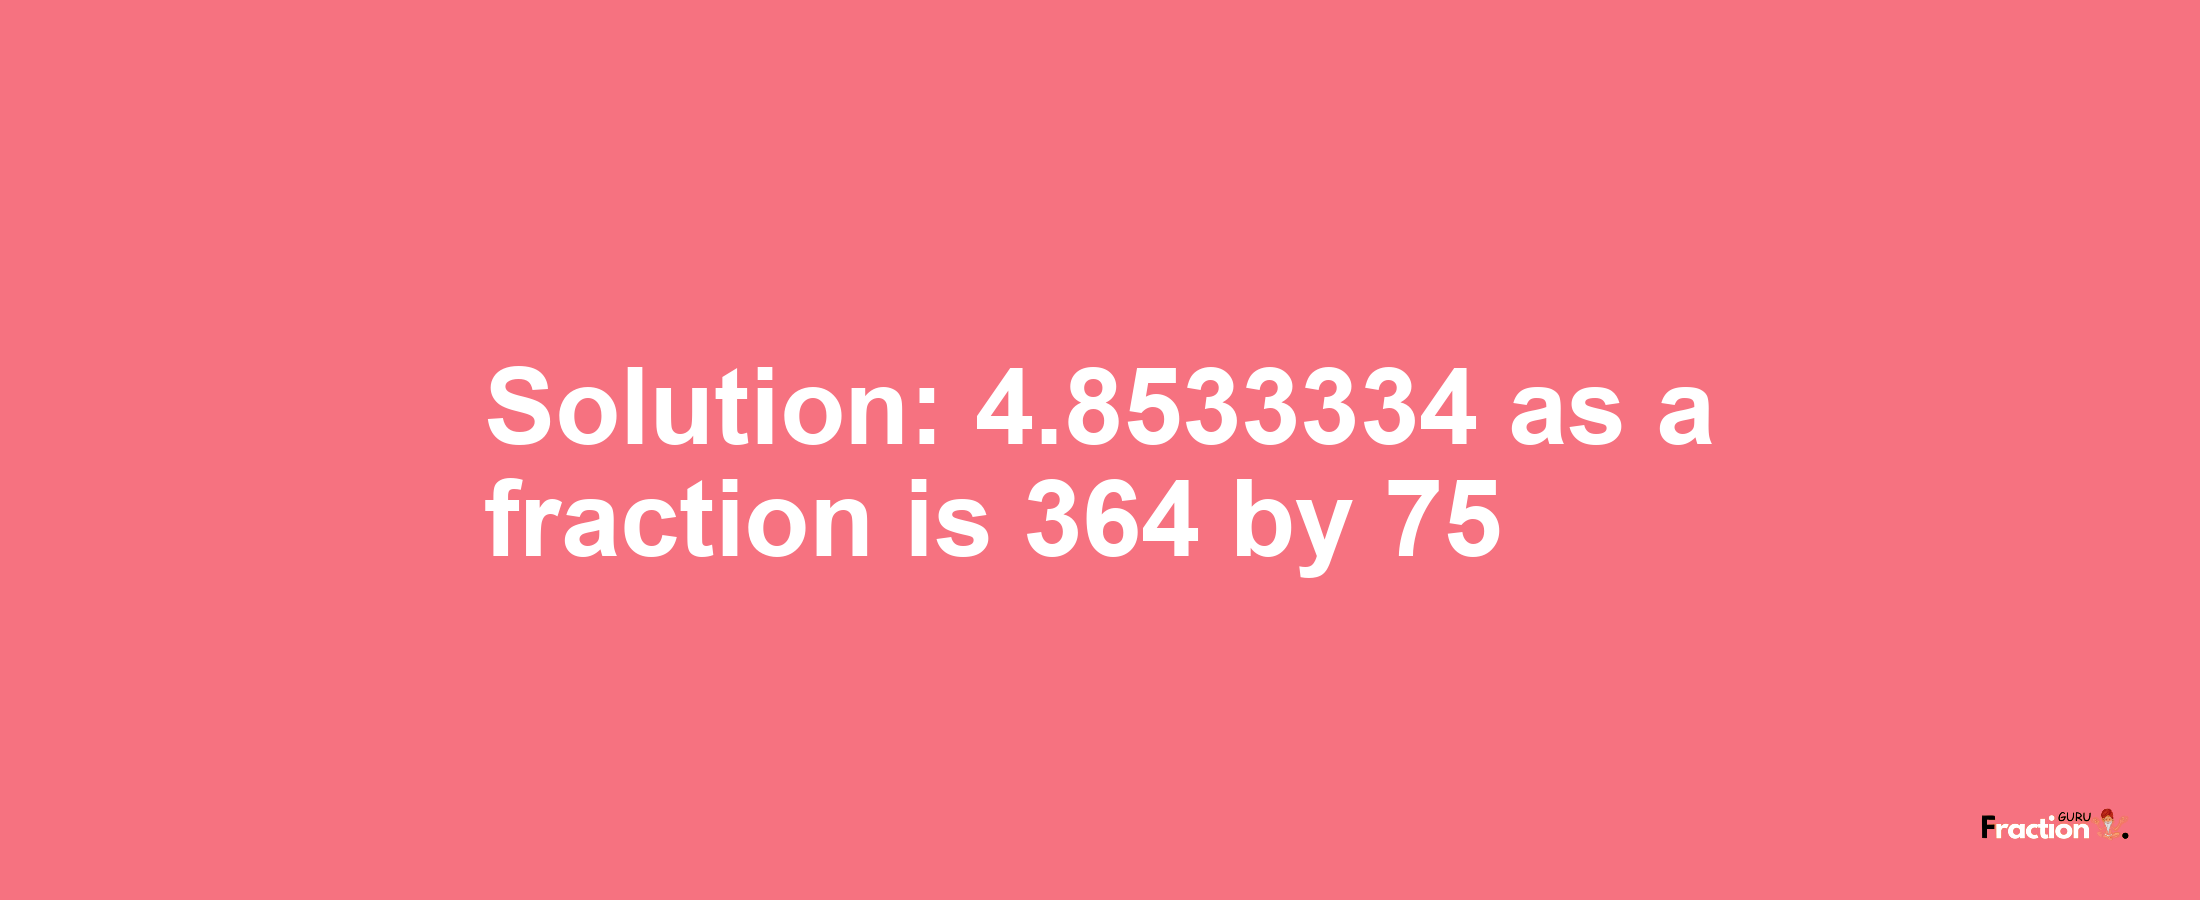 Solution:4.8533334 as a fraction is 364/75